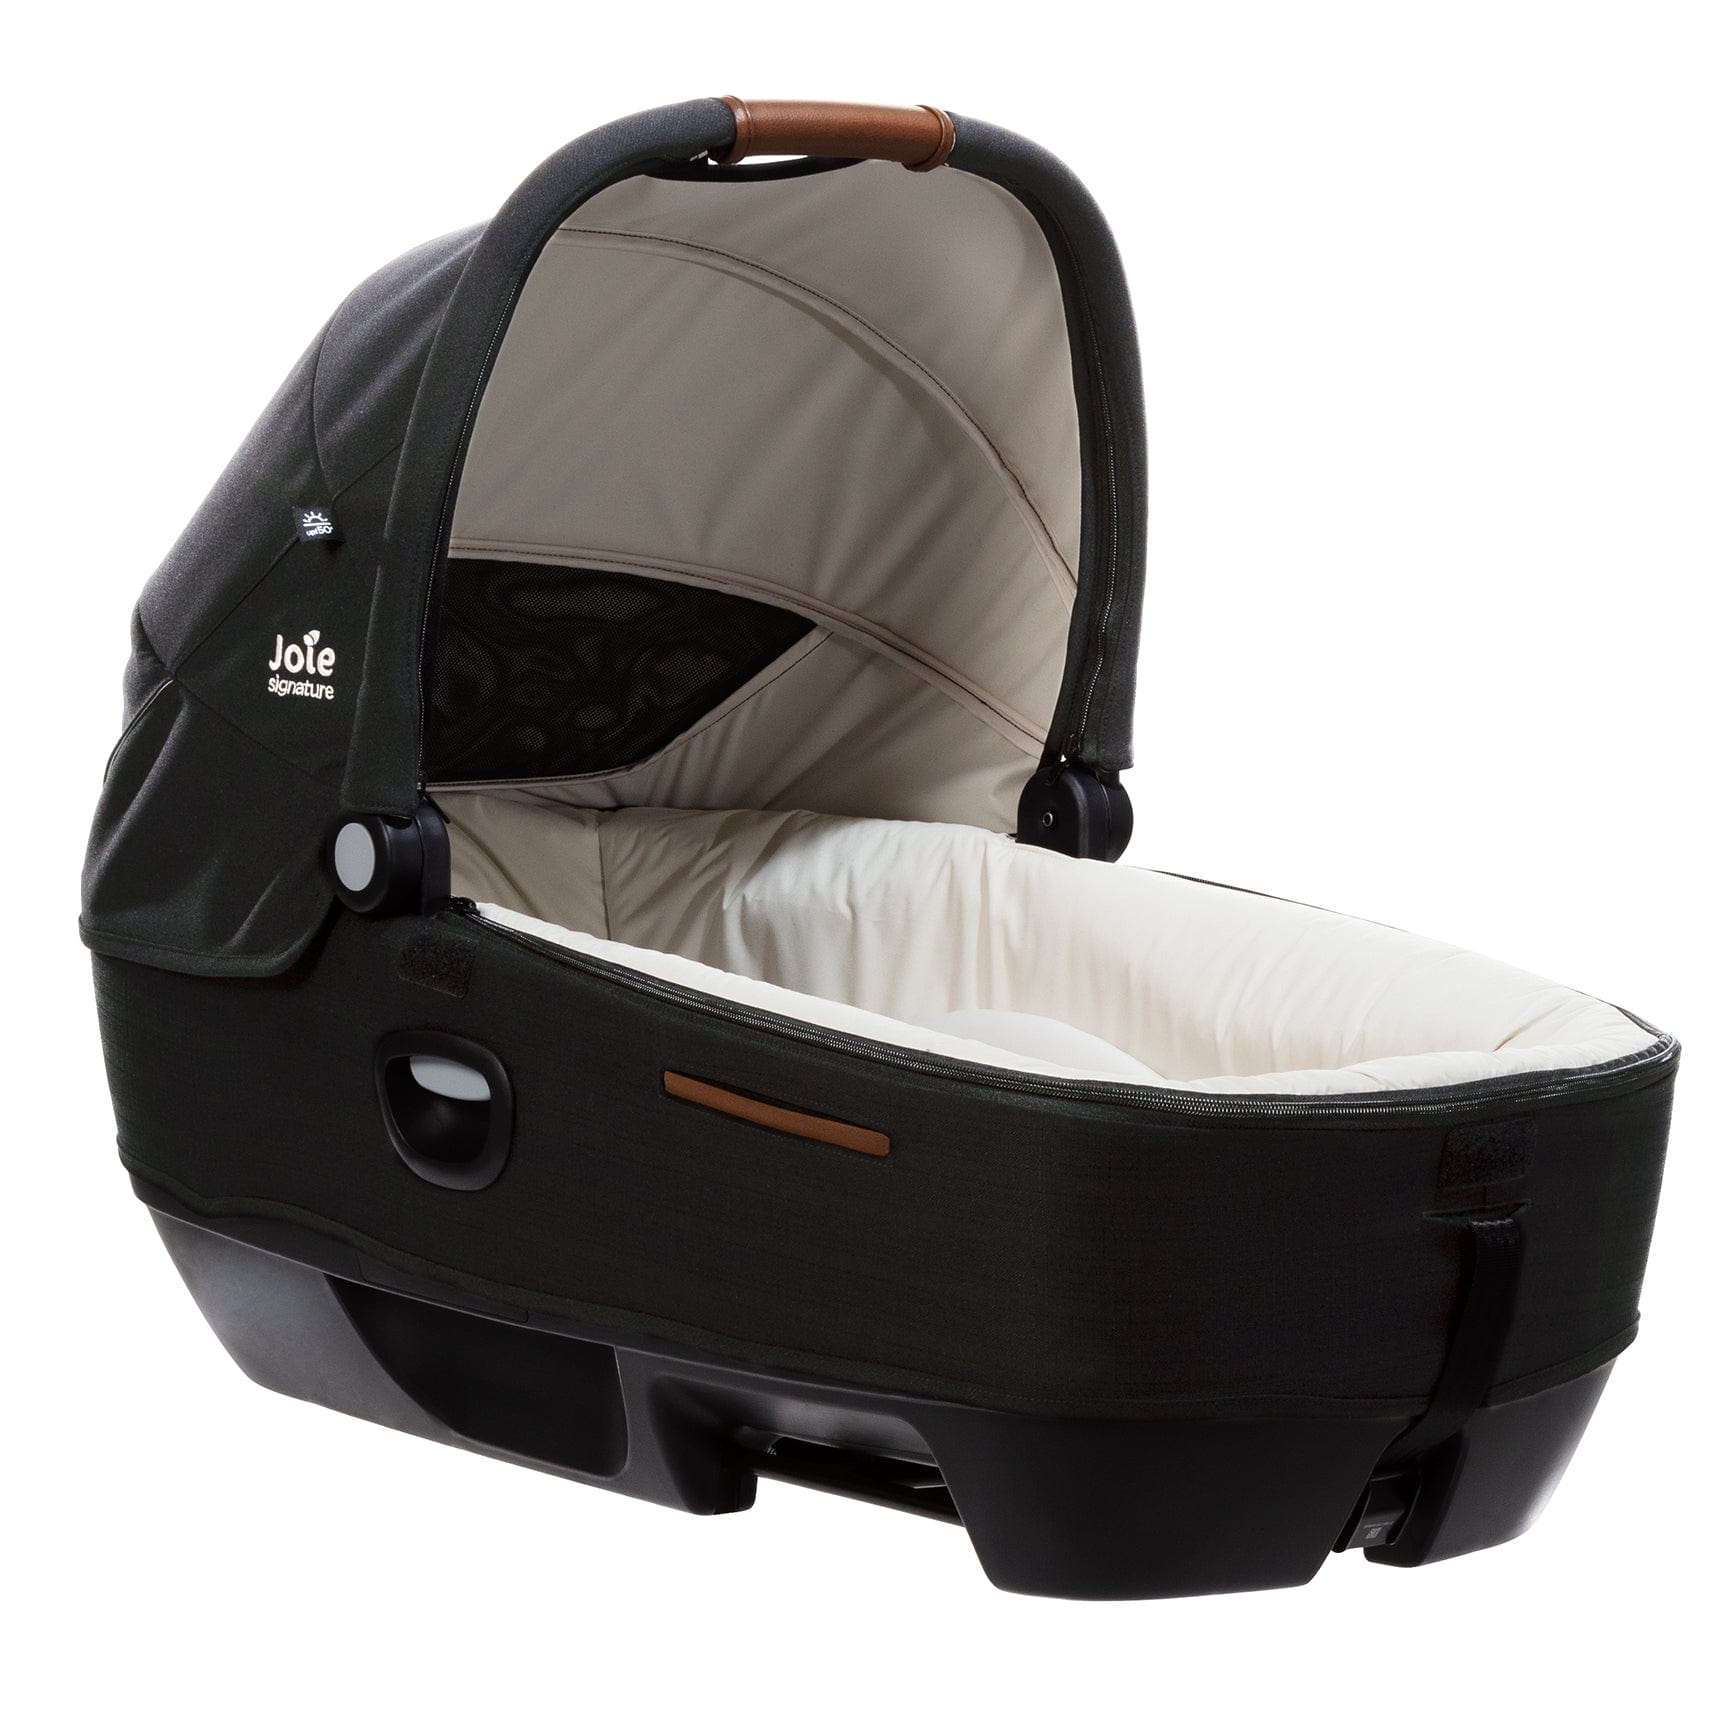 Joie Calmi Car Cot Bed & I-Base Encore in Eclipse 0-76 cm (Infant carriers) 12218-ECI 5056080612423